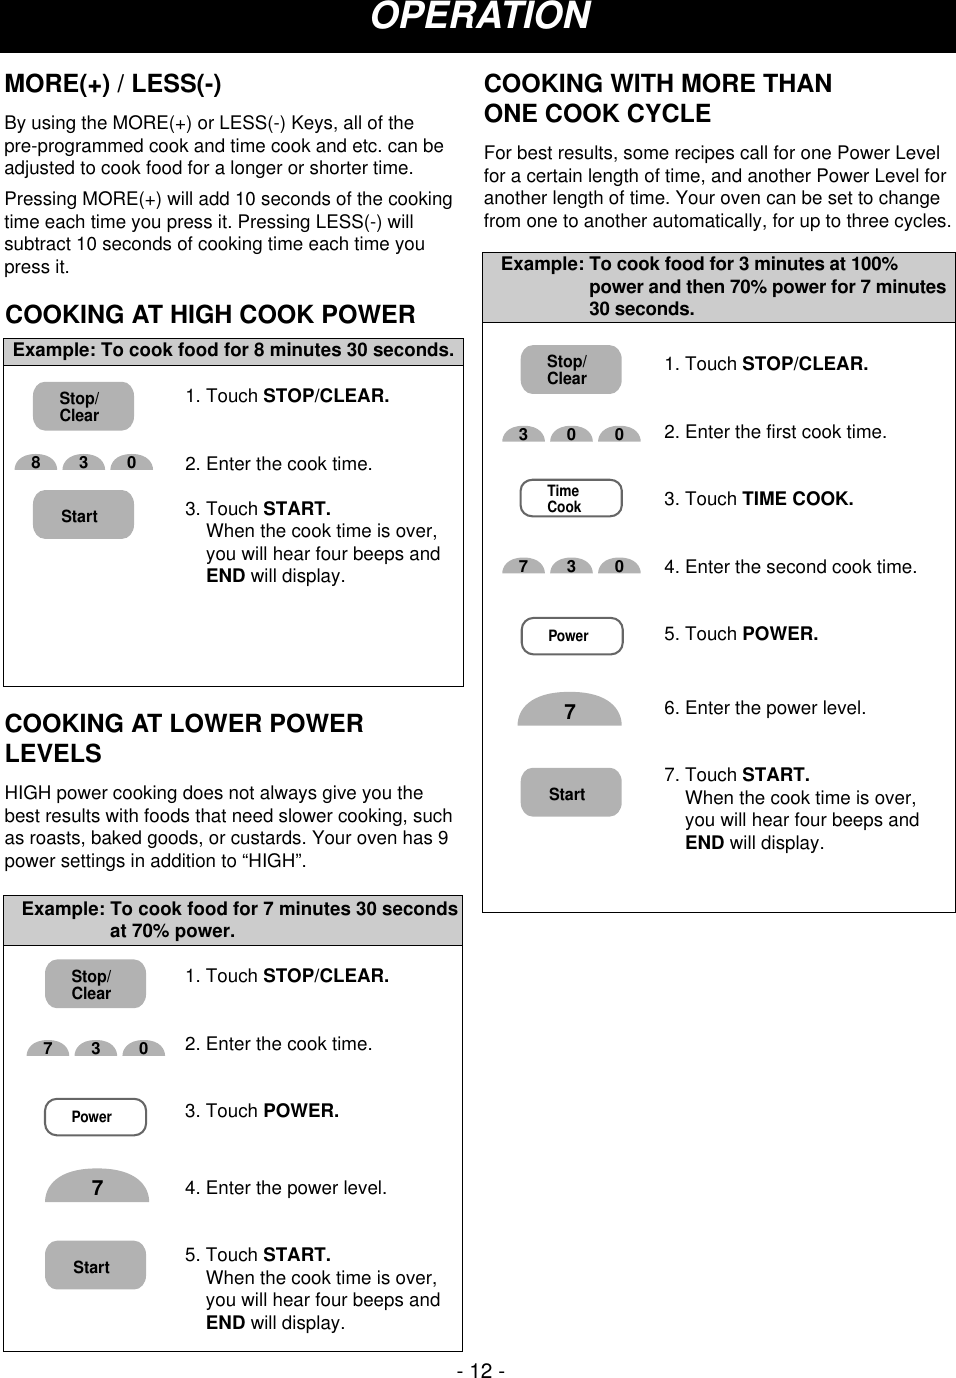 COOKING AT HIGH COOK POWER1. Touch STOP/CLEAR.2. Enter the cook time.3. Touch START.When the cook time is over,you will hear four beeps andEND will display.Example: To cook food for 8 minutes 30 seconds.1. Touch STOP/CLEAR.2. Enter the cook time.3. Touch POWER.4. Enter the power level.5. Touch START.When the cook time is over,you will hear four beeps andEND will display.Example: To cook food for 7 minutes 30 secondsat 70% power.COOKING AT LOWER POWERLEVELSHIGH power cooking does not always give you thebest results with foods that need slower cooking, suchas roasts, baked goods, or custards. Your oven has 9power settings in addition to “HIGH”. OPERATIONMORE(+) / LESS(-)By using the MORE(+) or LESS(-) Keys, all of the pre-programmed cook and time cook and etc. can beadjusted to cook food for a longer or shorter time.Pressing MORE(+) will add 10 seconds of the cookingtime each time you press it. Pressing LESS(-) willsubtract 10 seconds of cooking time each time youpress it.COOKING WITH MORE THAN ONE COOK CYCLEFor best results, some recipes call for one Power Levelfor a certain length of time, and another Power Level foranother length of time. Your oven can be set to changefrom one to another automatically, for up to three cycles.- 12 -Stop/Clear730Power7Start1. Touch STOP/CLEAR.2. Enter the first cook time.3. Touch TIME COOK.4. Enter the second cook time.5. Touch POWER.6. Enter the power level.7. Touch START.When the cook time is over,you will hear four beeps andEND will display.Example: To cook food for 3 minutes at 100%power and then 70% power for 7 minutes30 seconds.Start300TimeCook730Power7Stop/ClearStop/Clear830Start